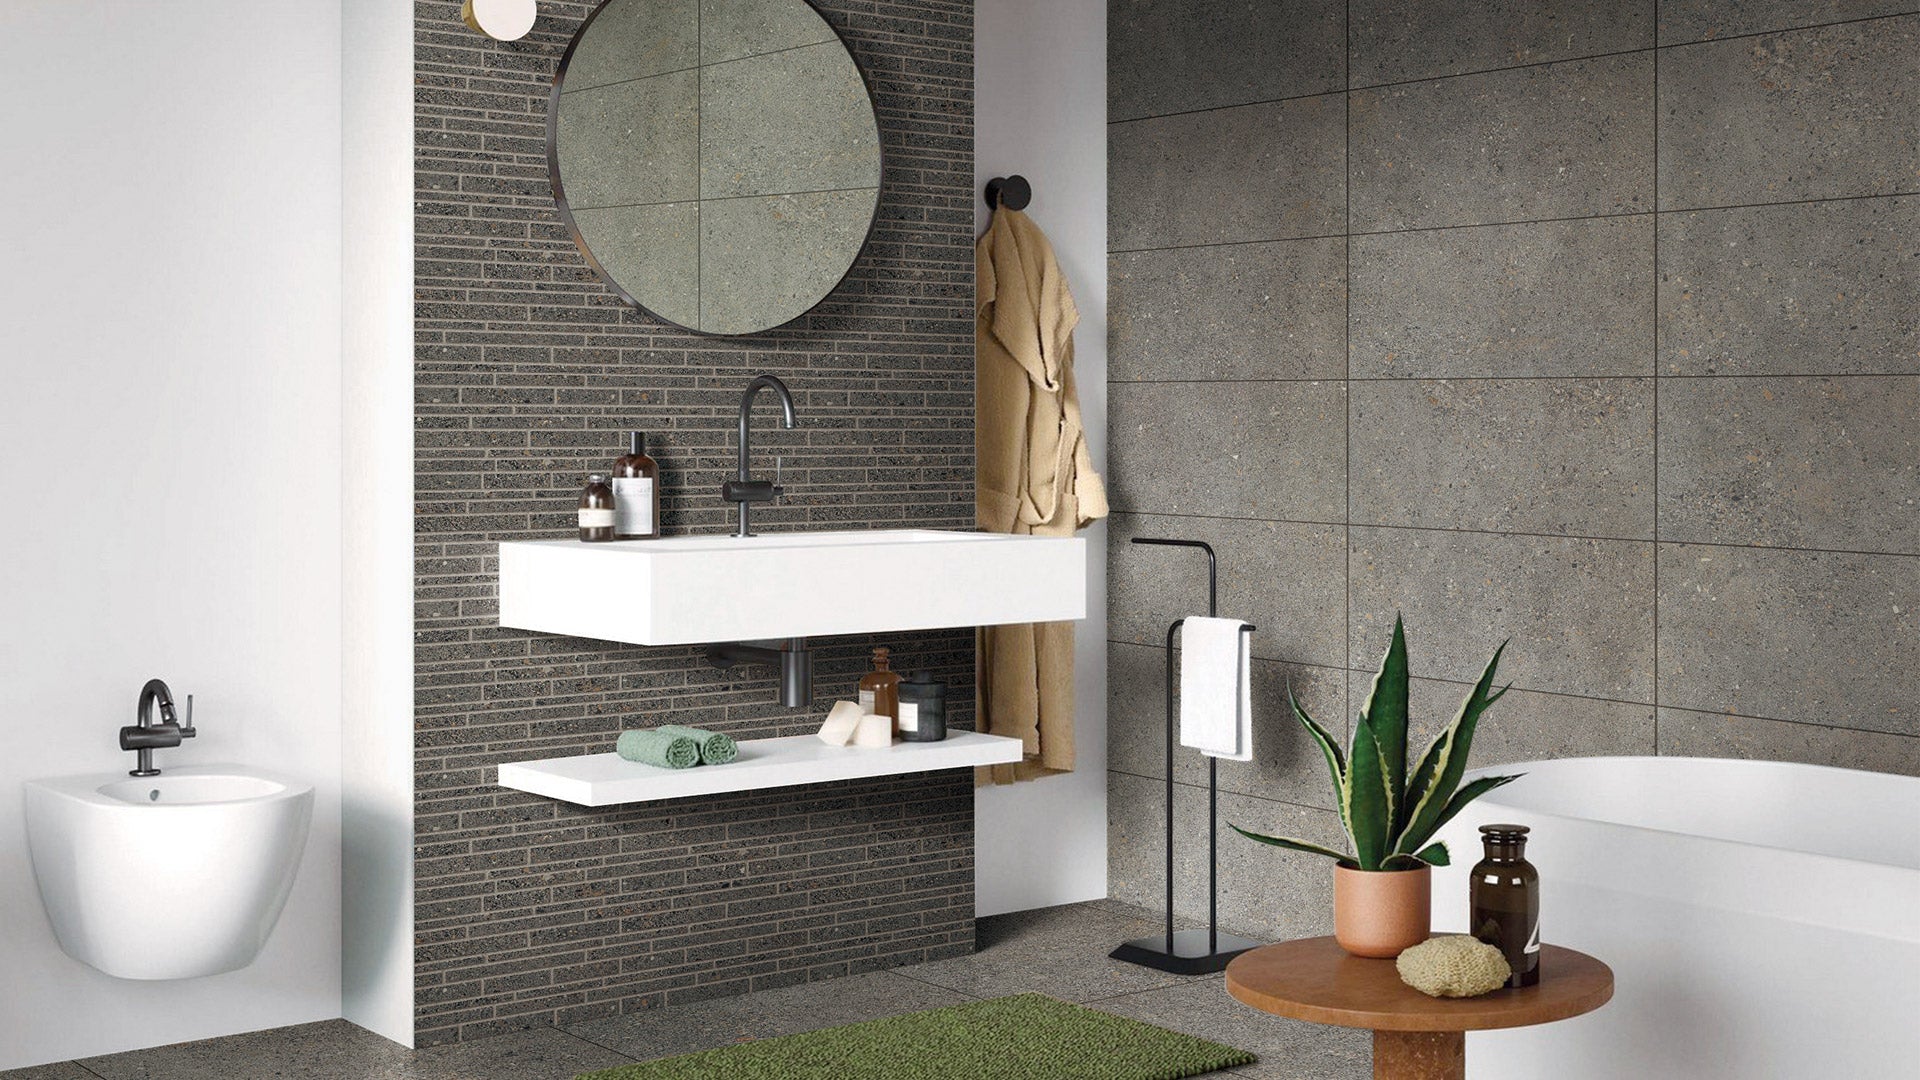 How to Match Different Tile Finishes and Formats